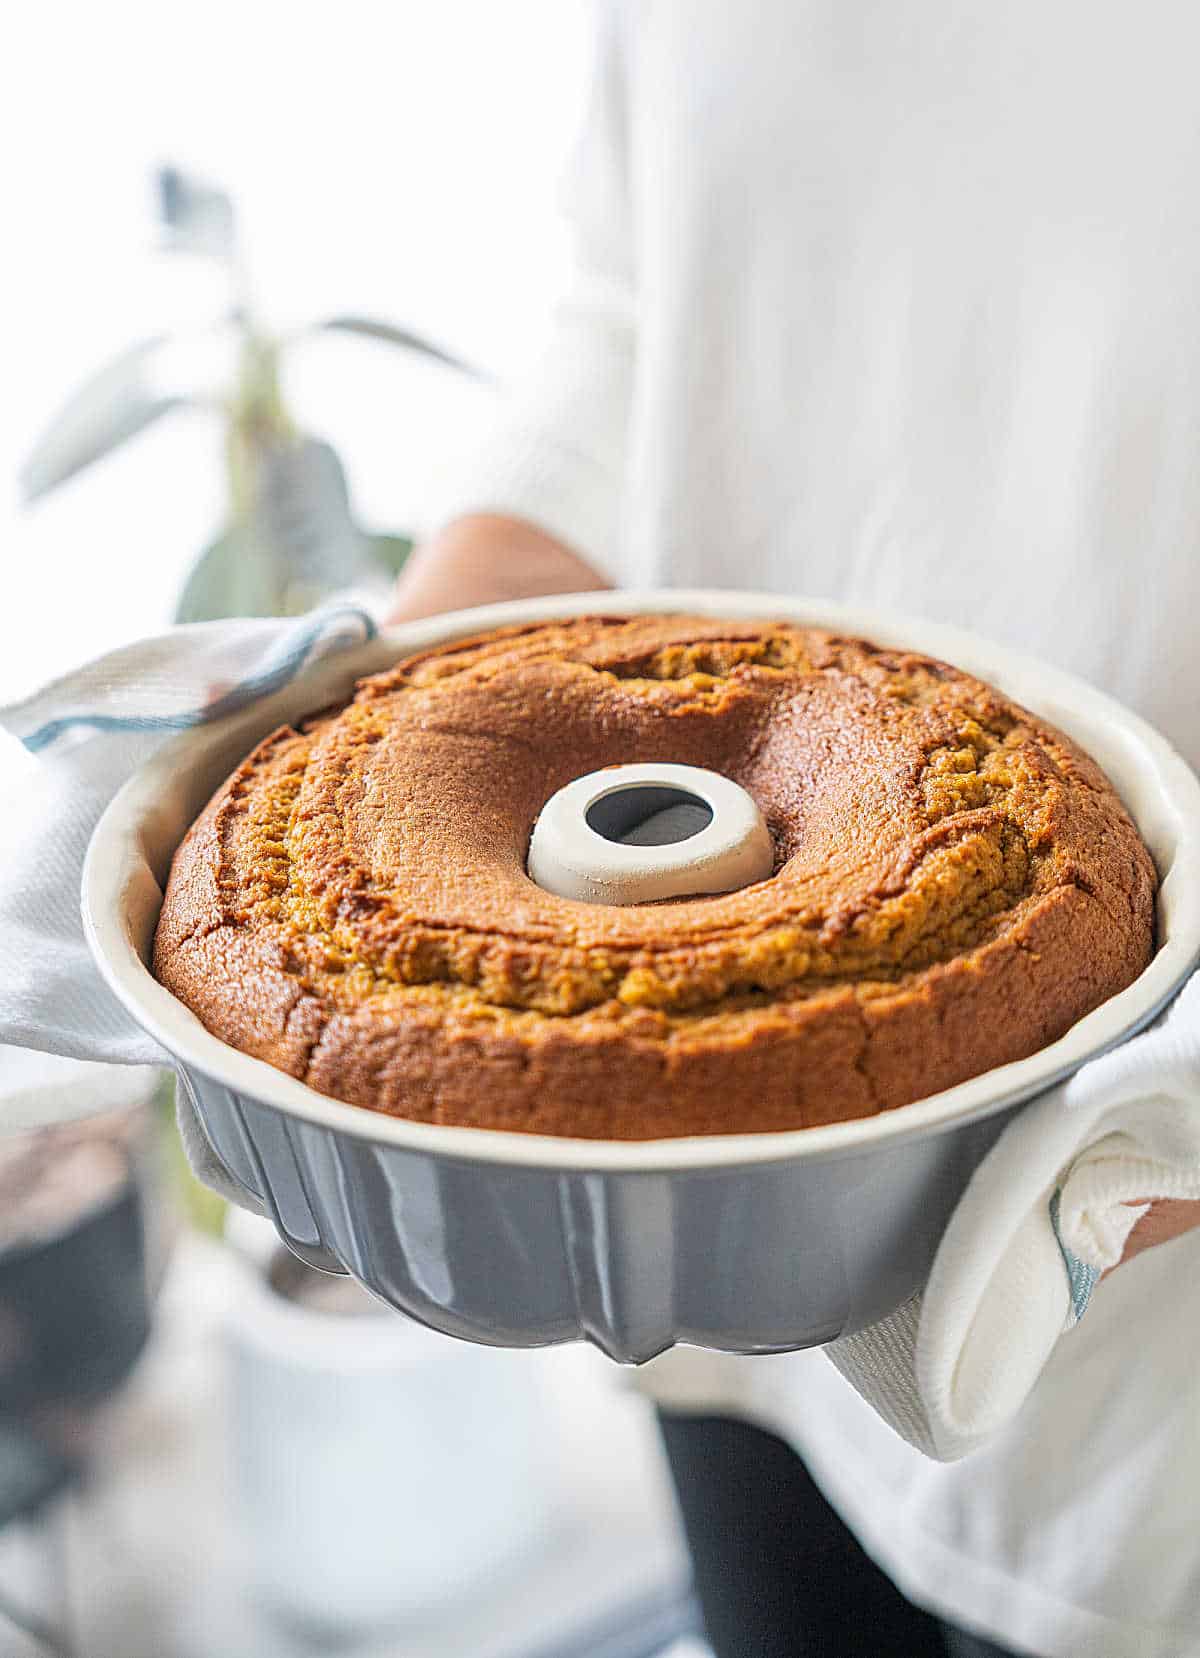 Holding a baked sweet potato bundt cake in a grey pan with a kitchen towel. White background with plants.